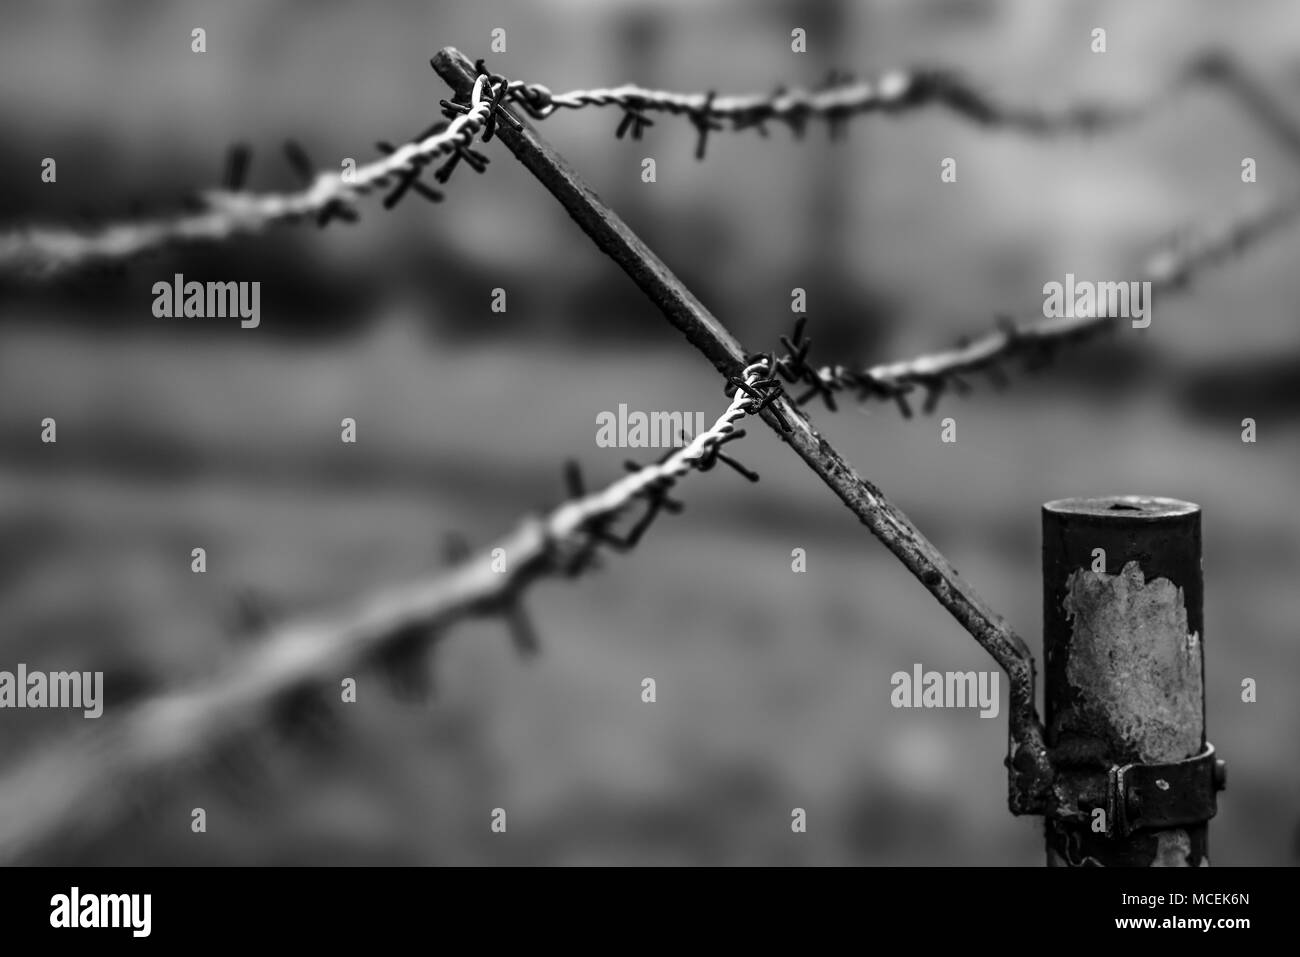 A barbed wire Stock Photo